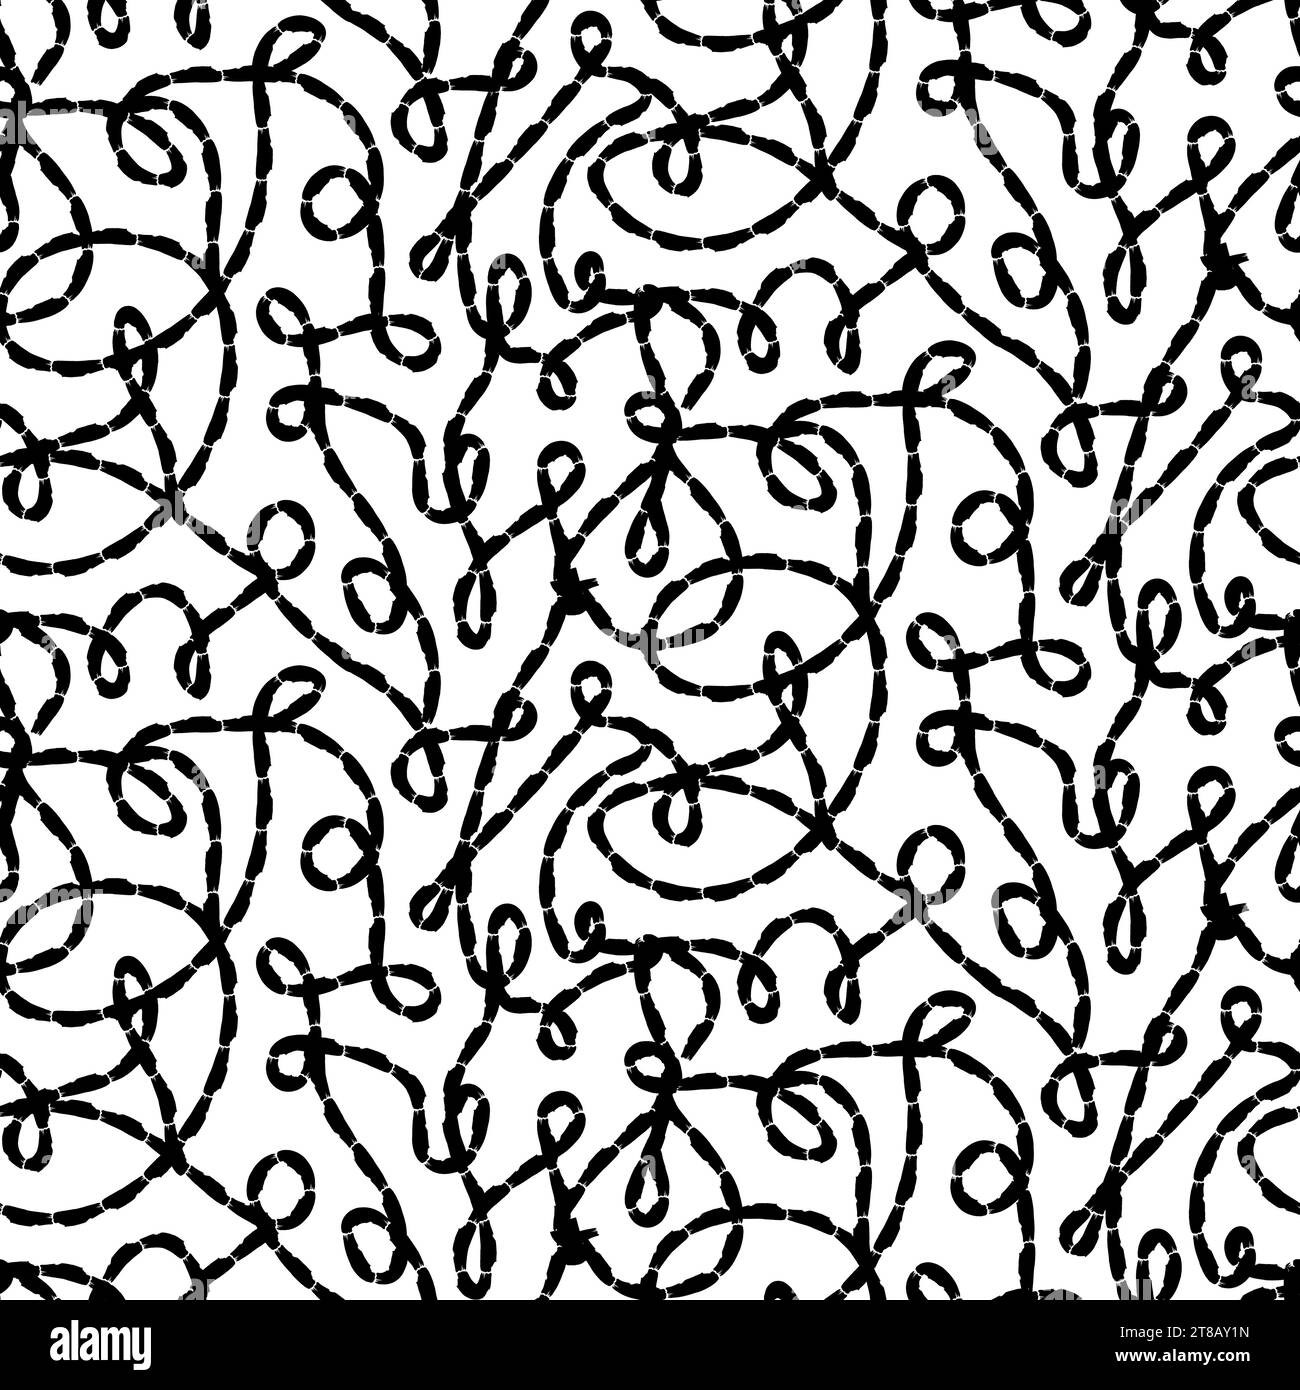 Grunge Black Lines seamless pattern with hand drawn curl lines. Ornament for printing on fabric, cover and packaging. Simple black and white vector or Stock Vector